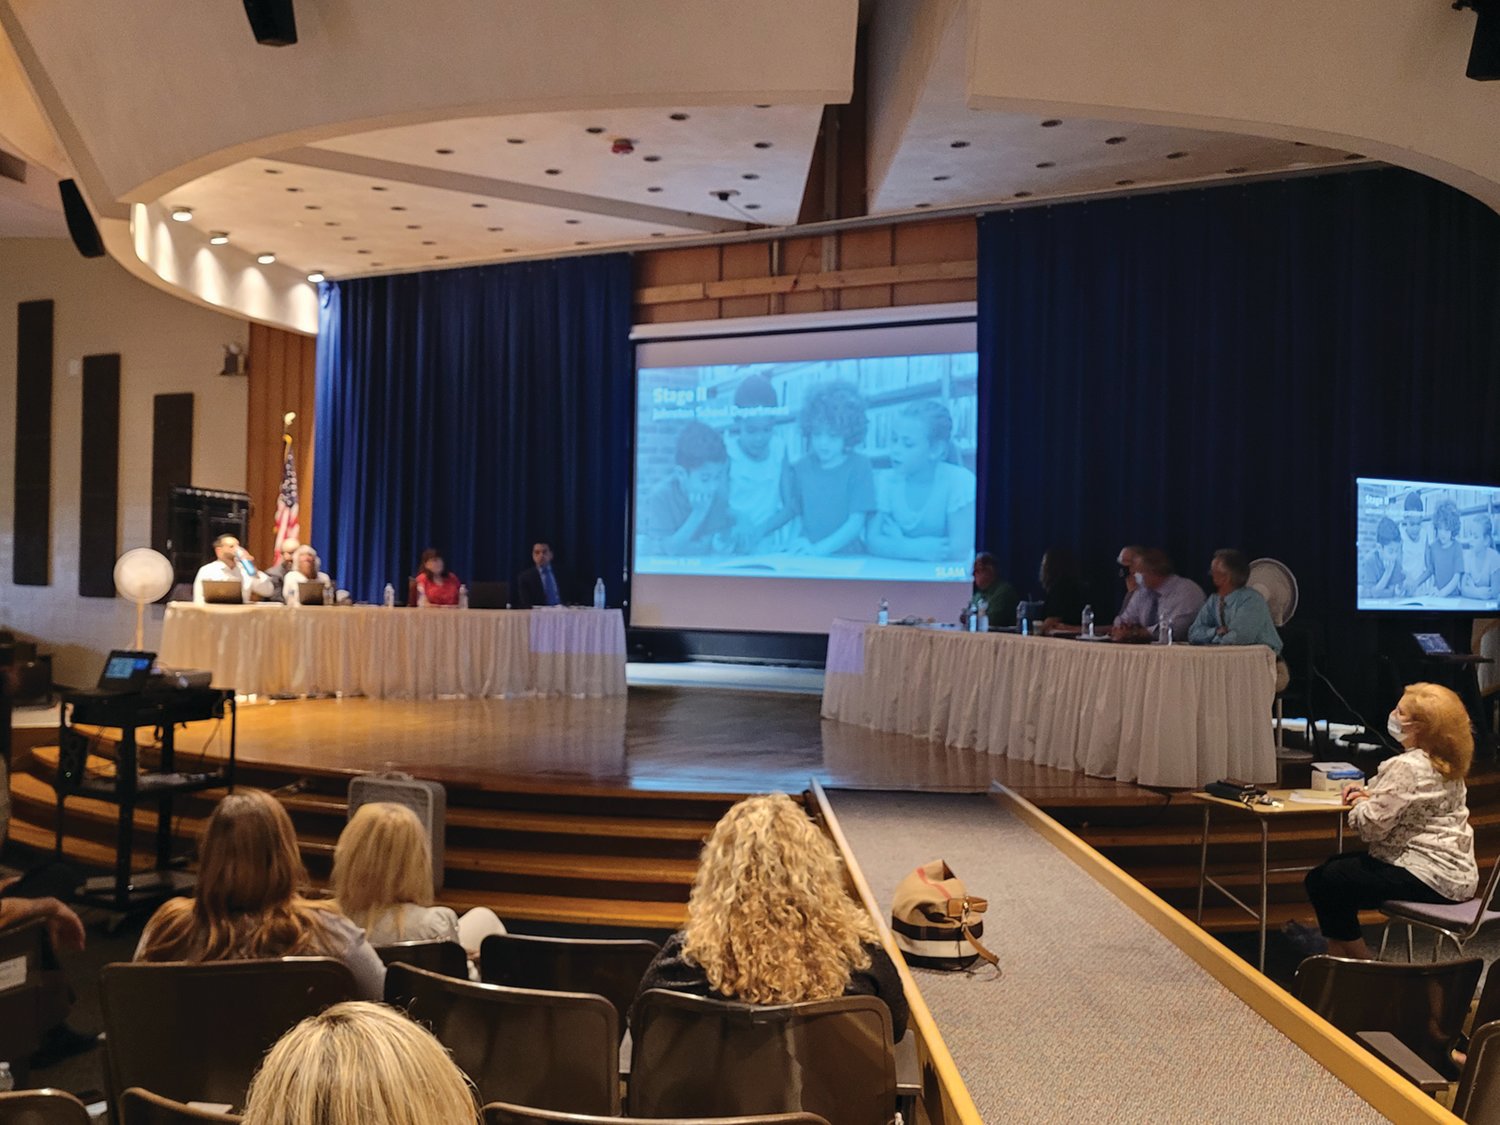 The SLAM collaborative firm delivered a visual presentation detailing proposed new school projects in town at a meeting in the Johnston High School auditorium on Wednesday night, Sept. 15, 2021.